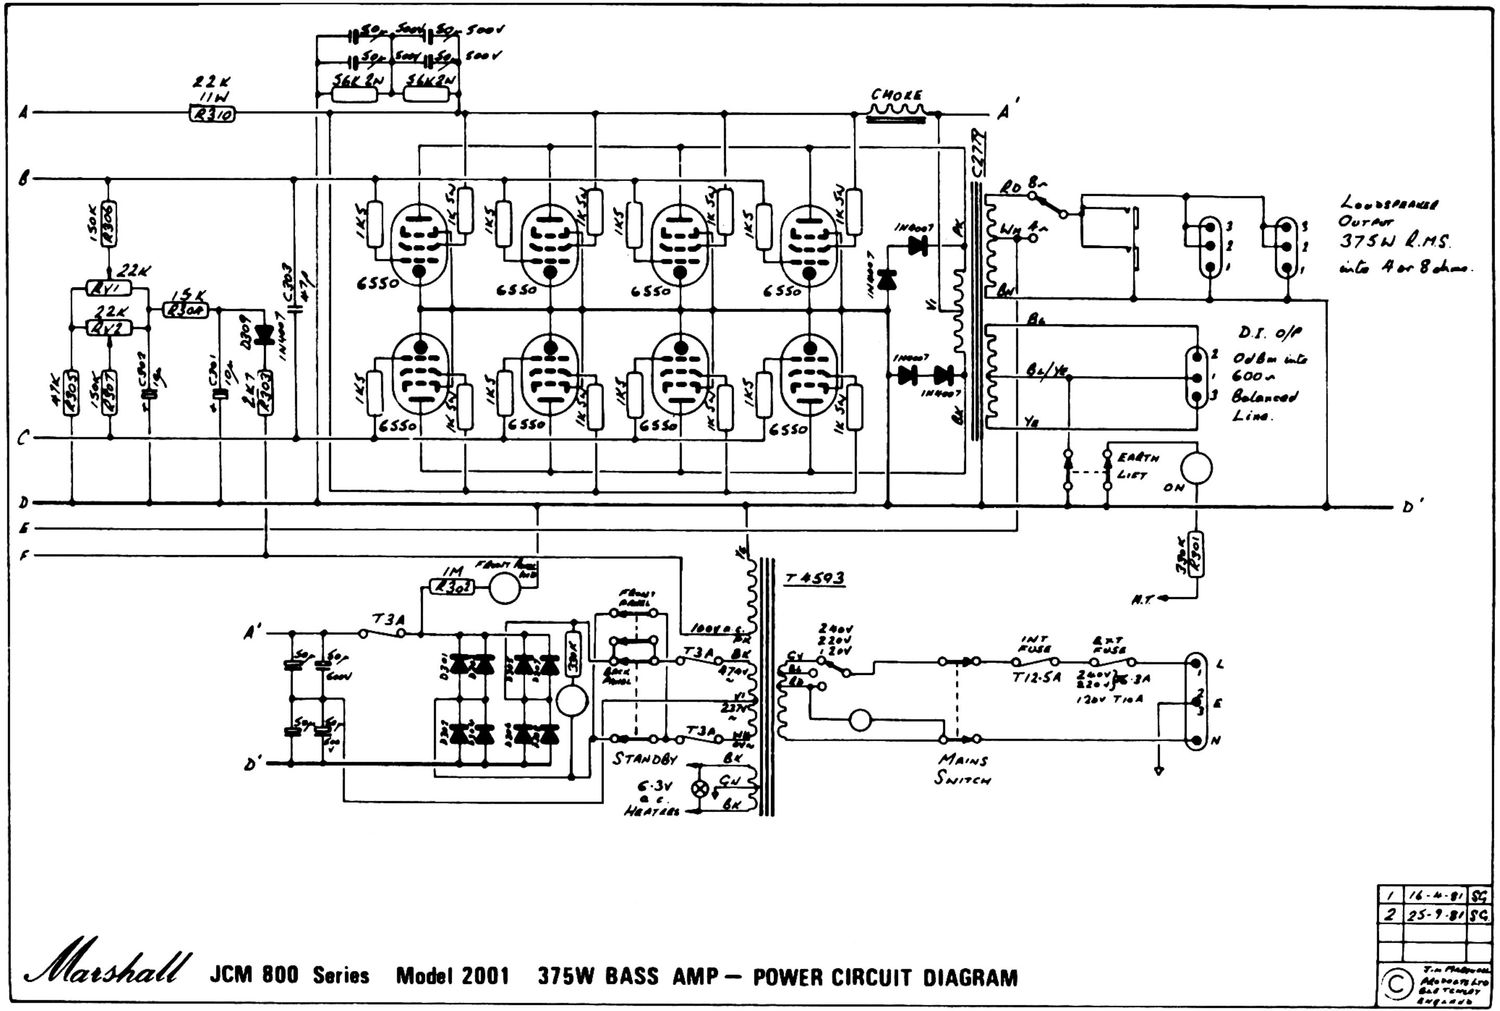 Marshall 2001 375W Bass Amp Pwr 2 Schematic